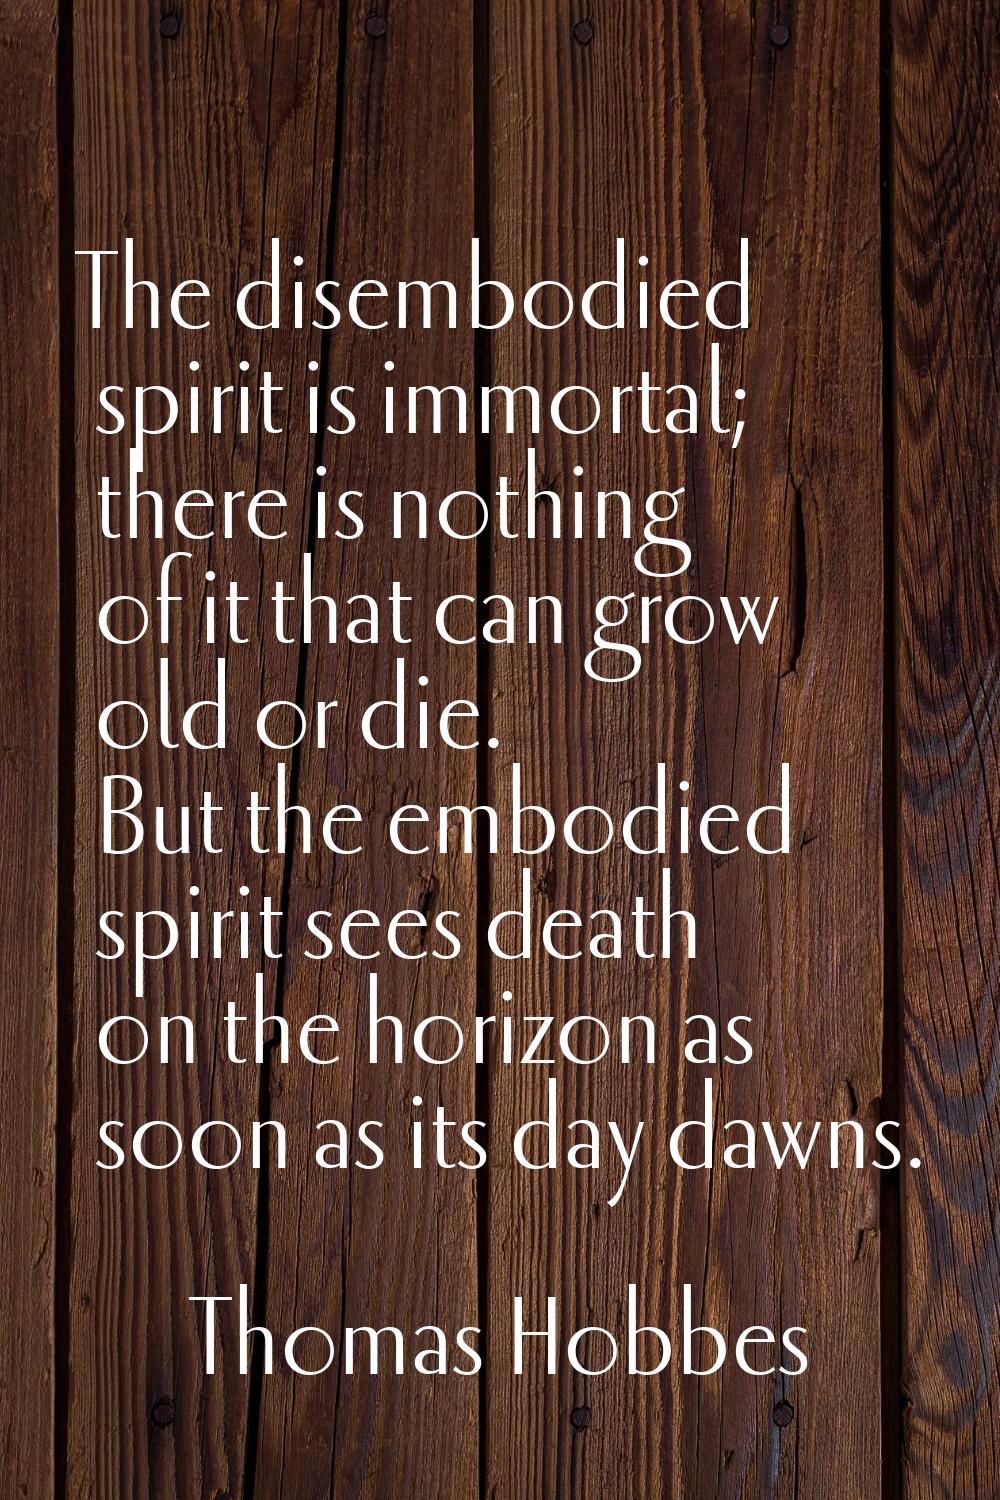 The disembodied spirit is immortal; there is nothing of it that can grow old or die. But the embodi